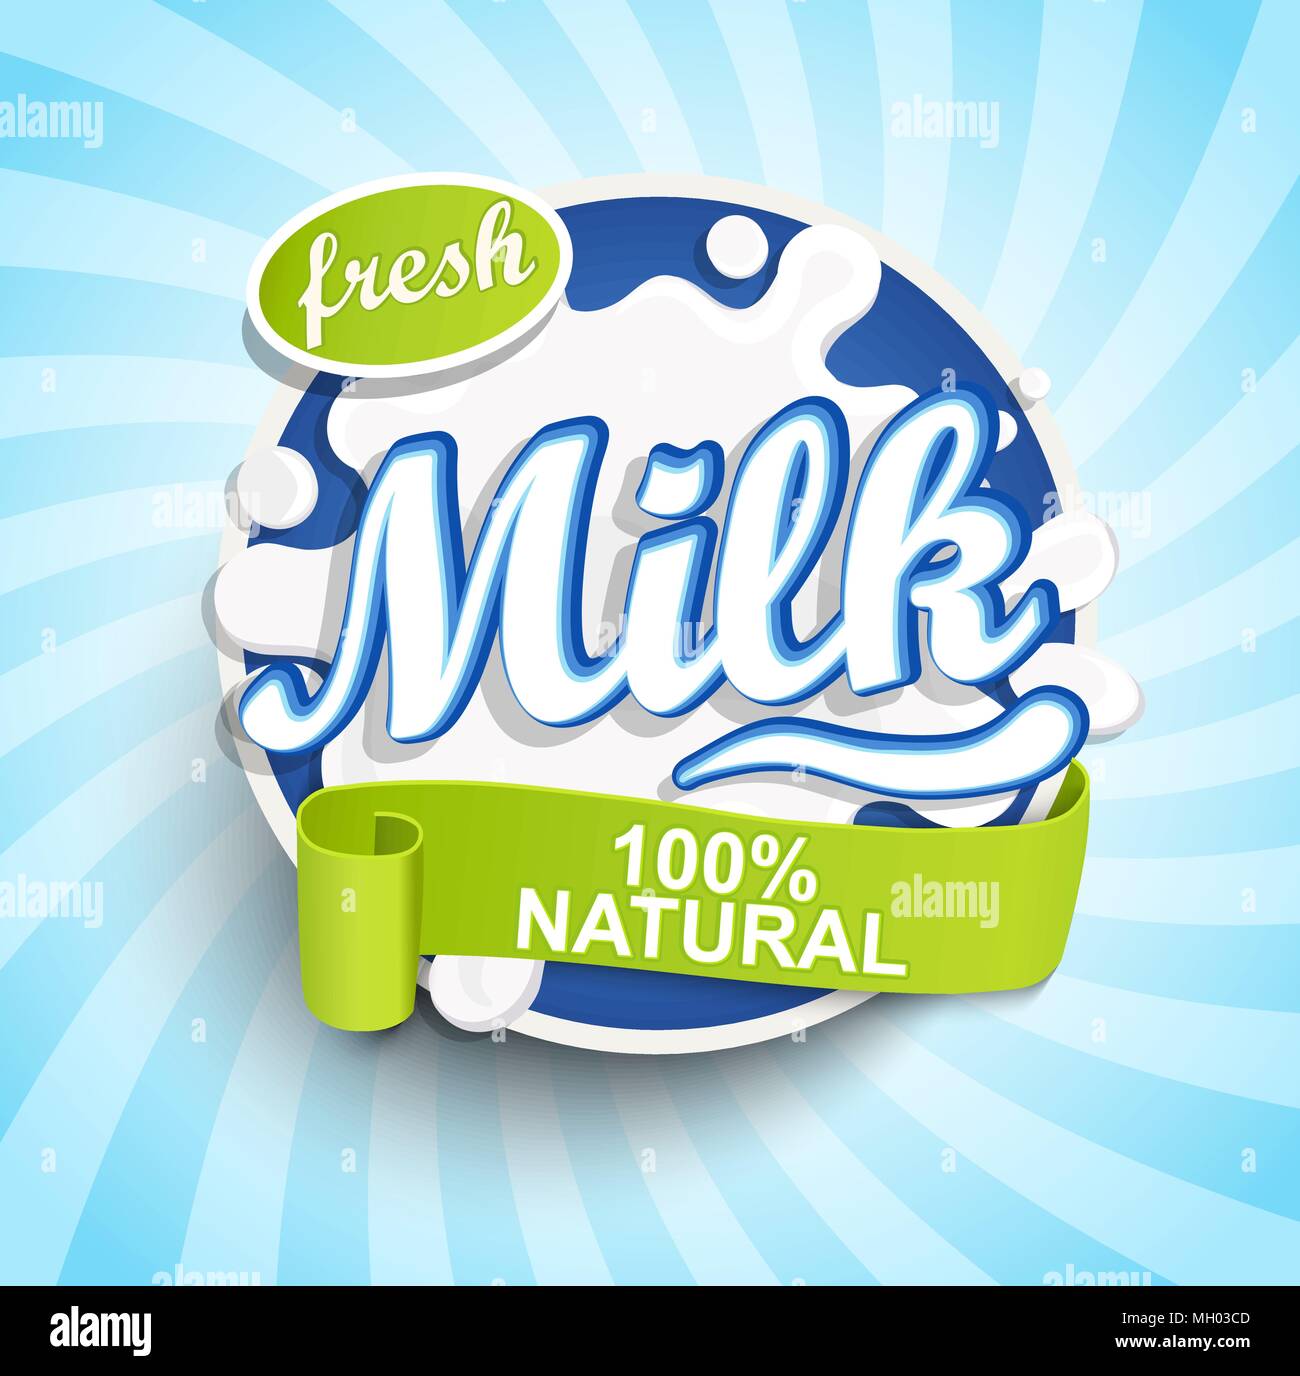 Fresh and Natural Milk label splash with ribbon on blue sunburst background for logo, template, label, badge, emblem for groceries, agriculture stores, packaging and advertising.. Vector illustration. Stock Vector